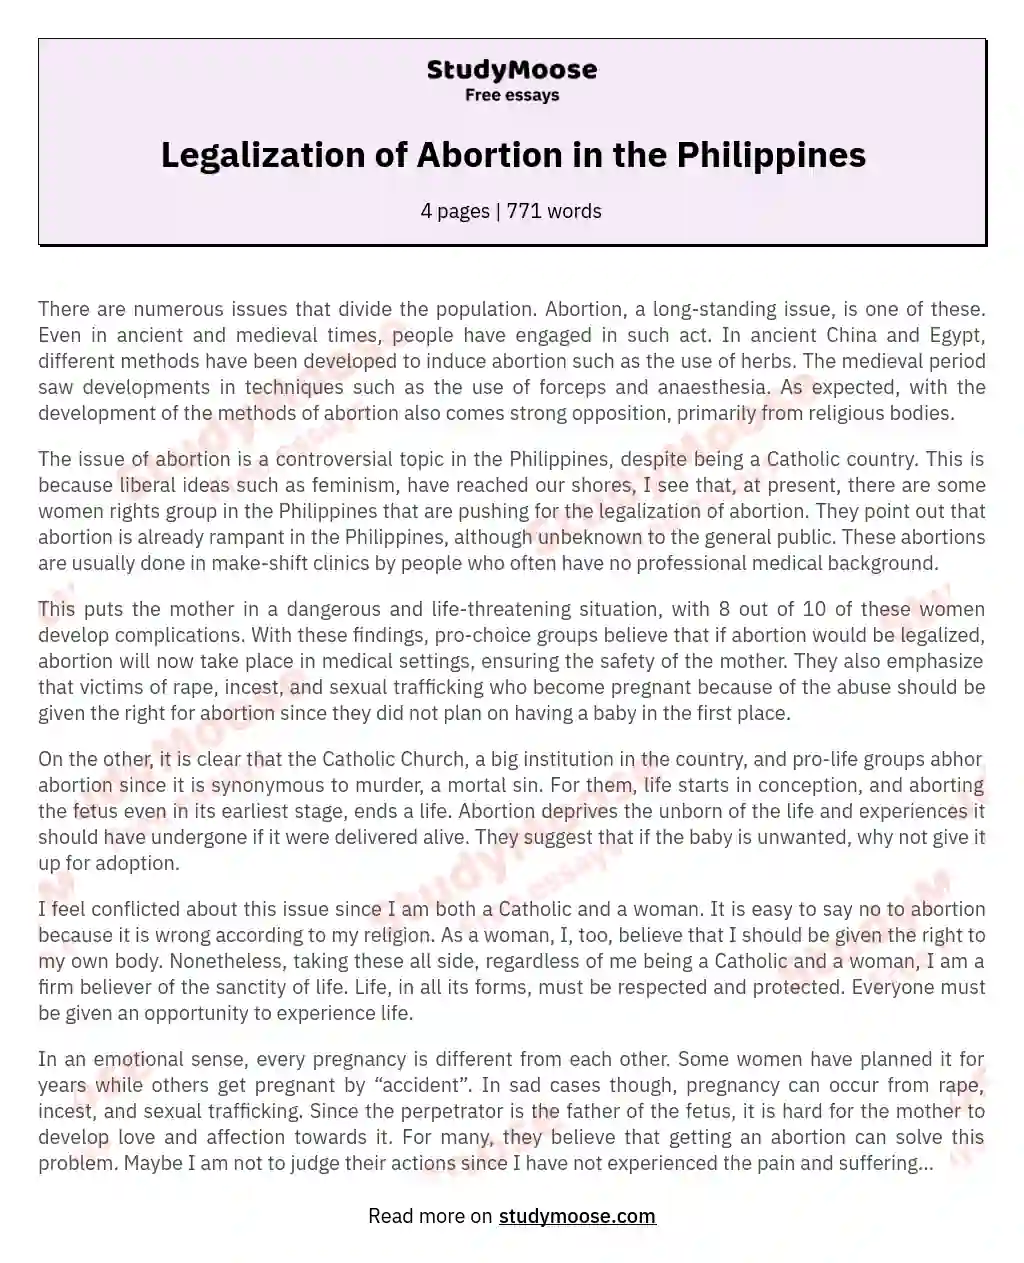 Legalization of Abortion in the Philippines essay